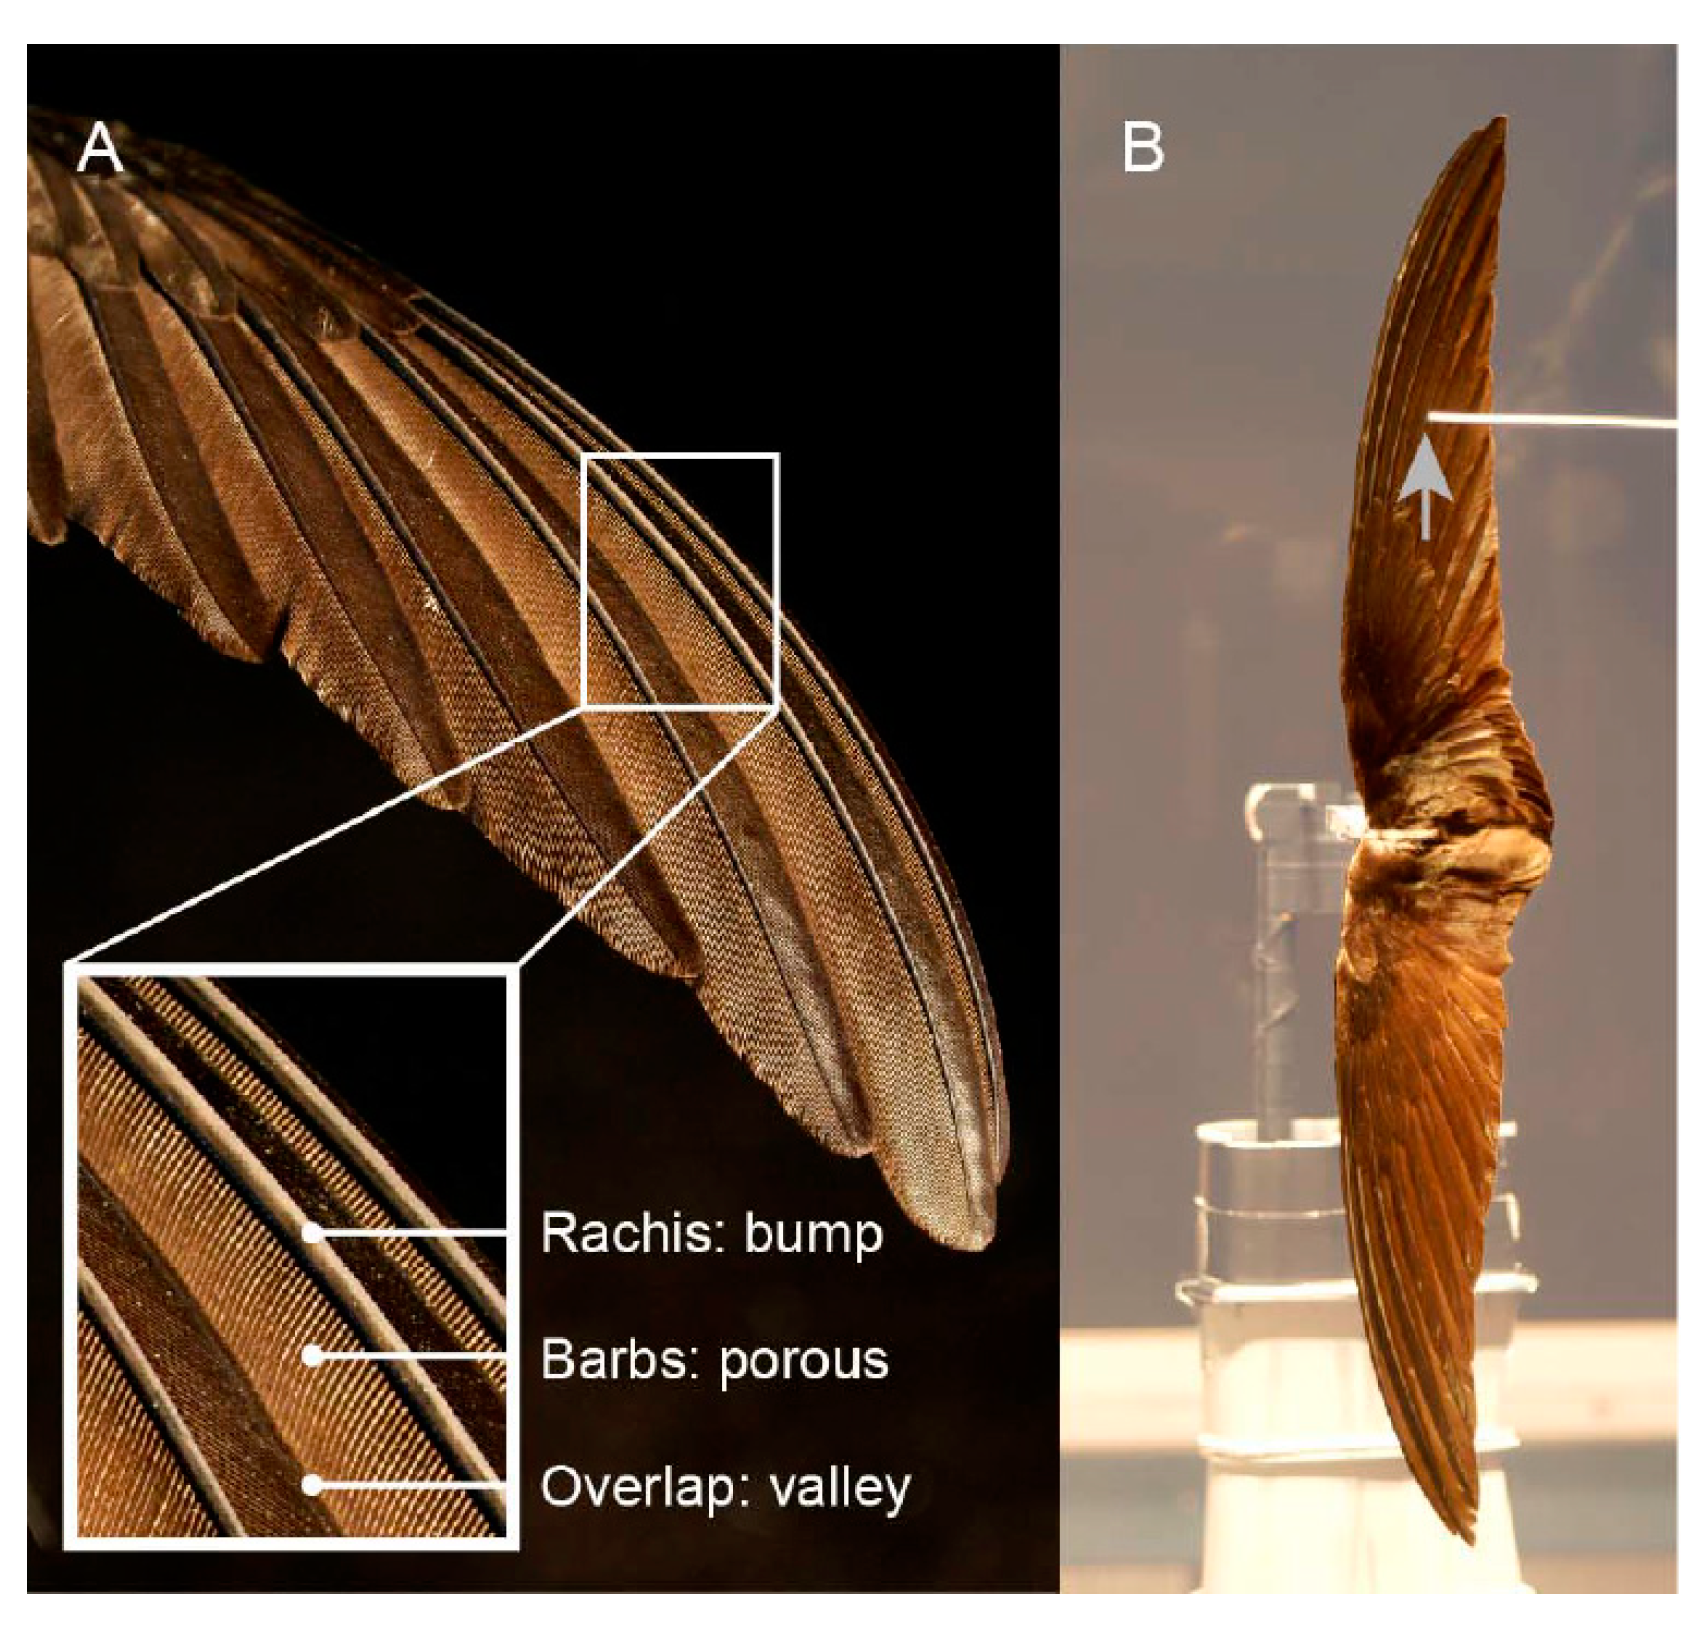 Research sheds light on how patterns form in bird feathers